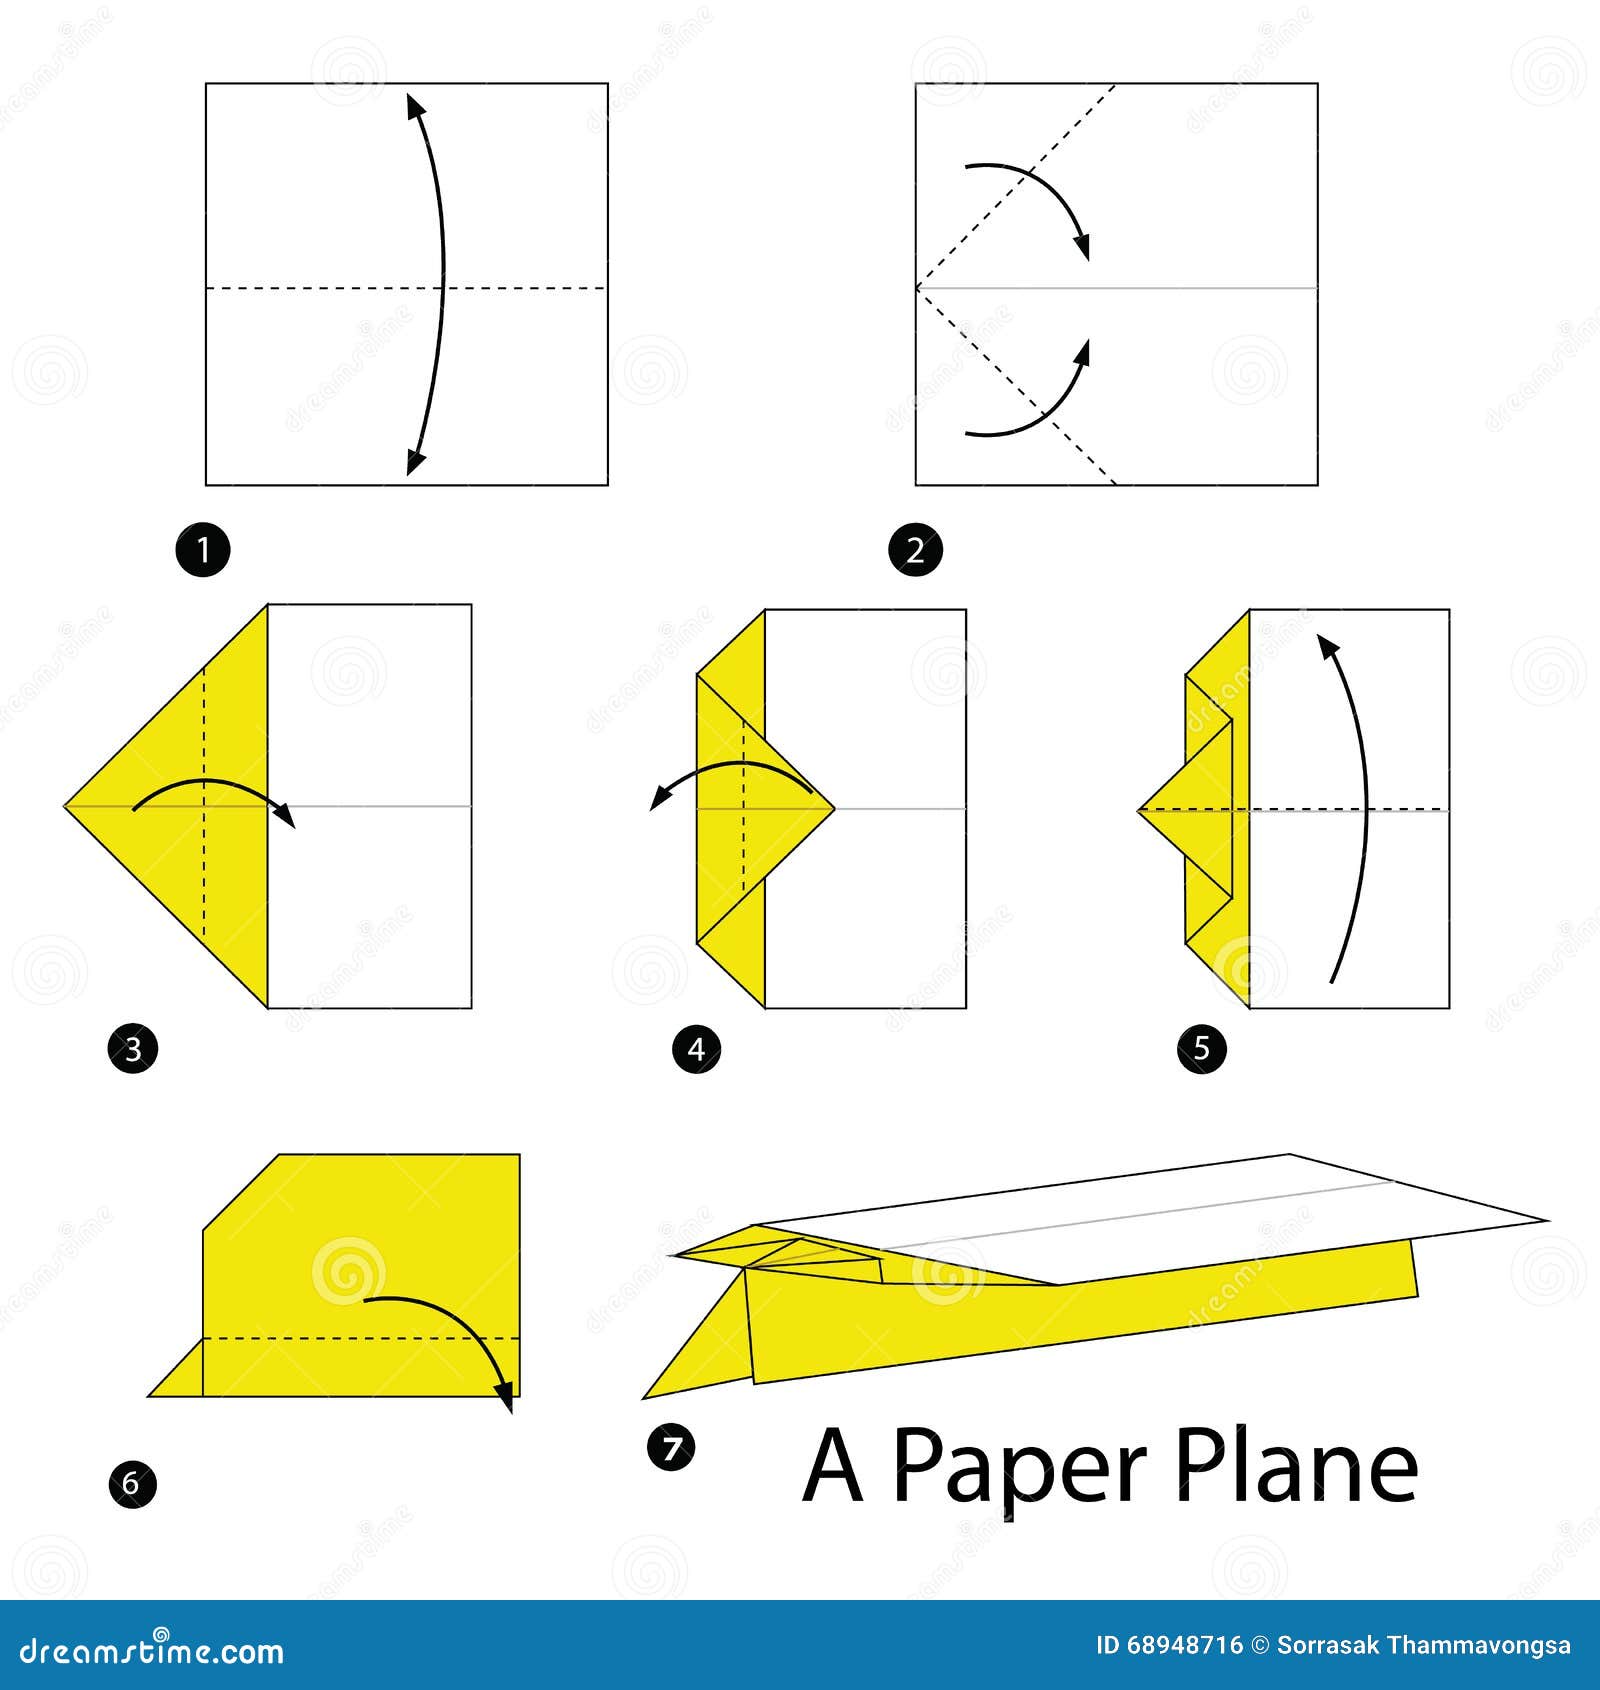 Step By Step Instructions How To Make Origami A Paper Plane